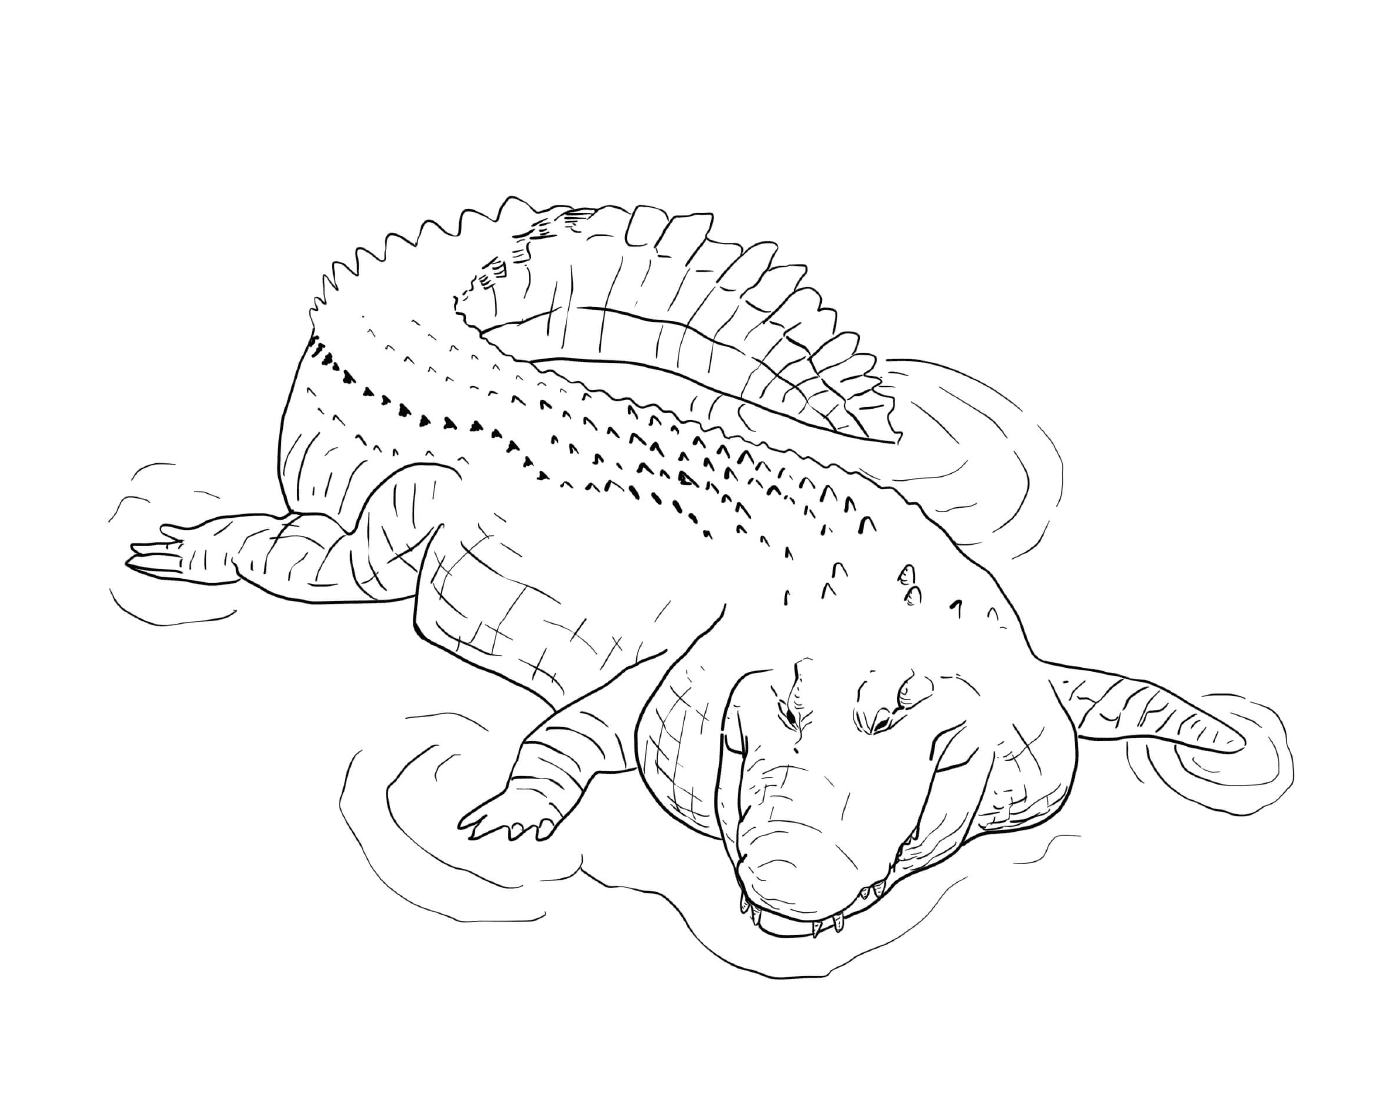  A marine crocodile from the Indo-Pacific Basin, lying in the water 